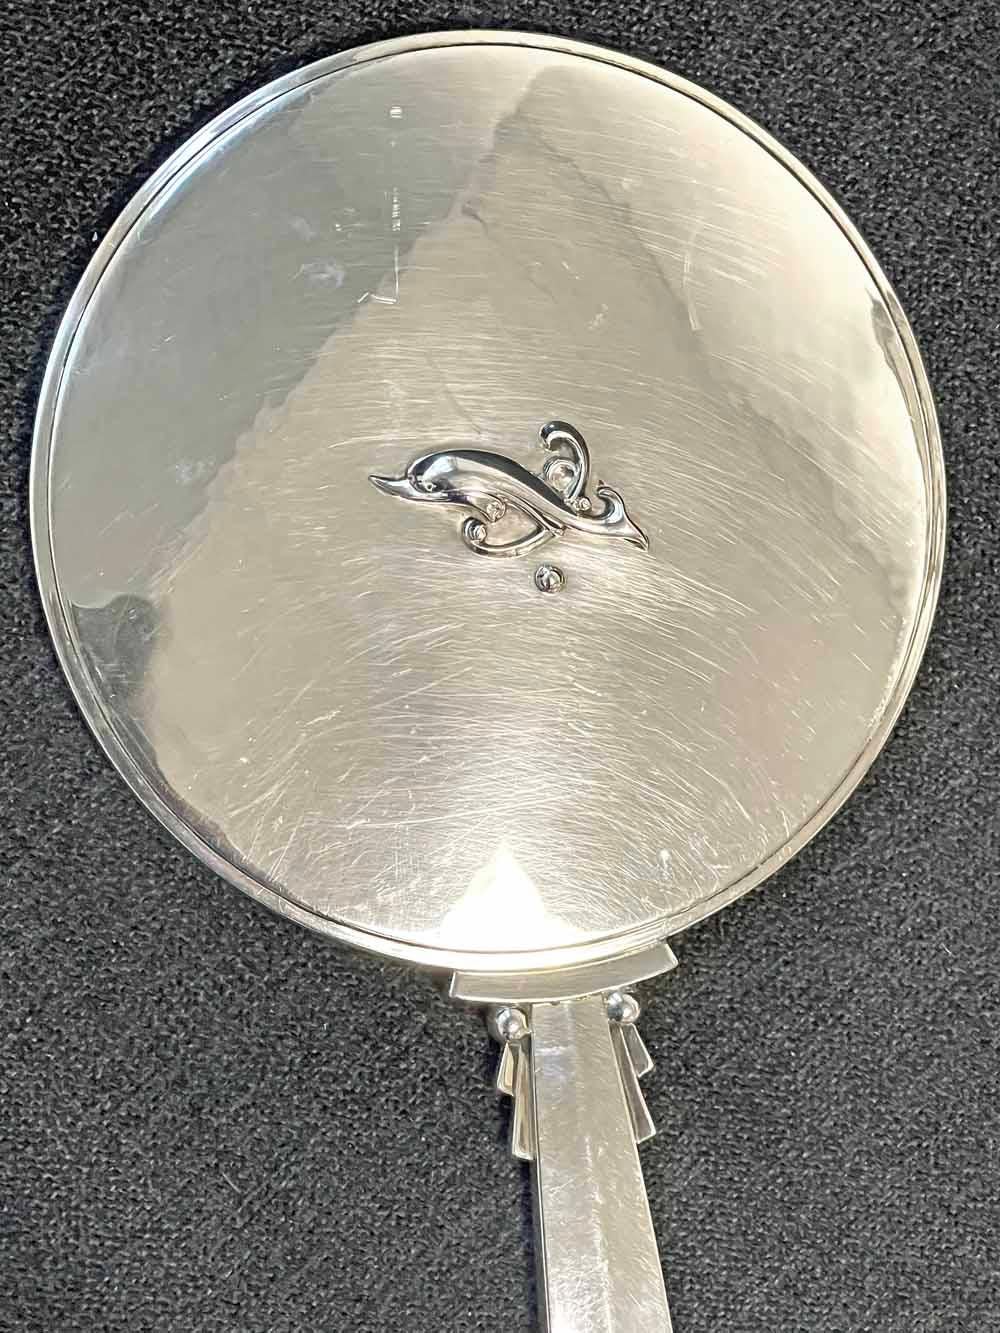 An iconic Art Deco design, crafted in sterling silver by Harald Nielsen for George Jensen -- arguably the most renowned silversmith in the world at the time -- this hand mirror features a sleek, streamlined form and a delightful dolphin form on the